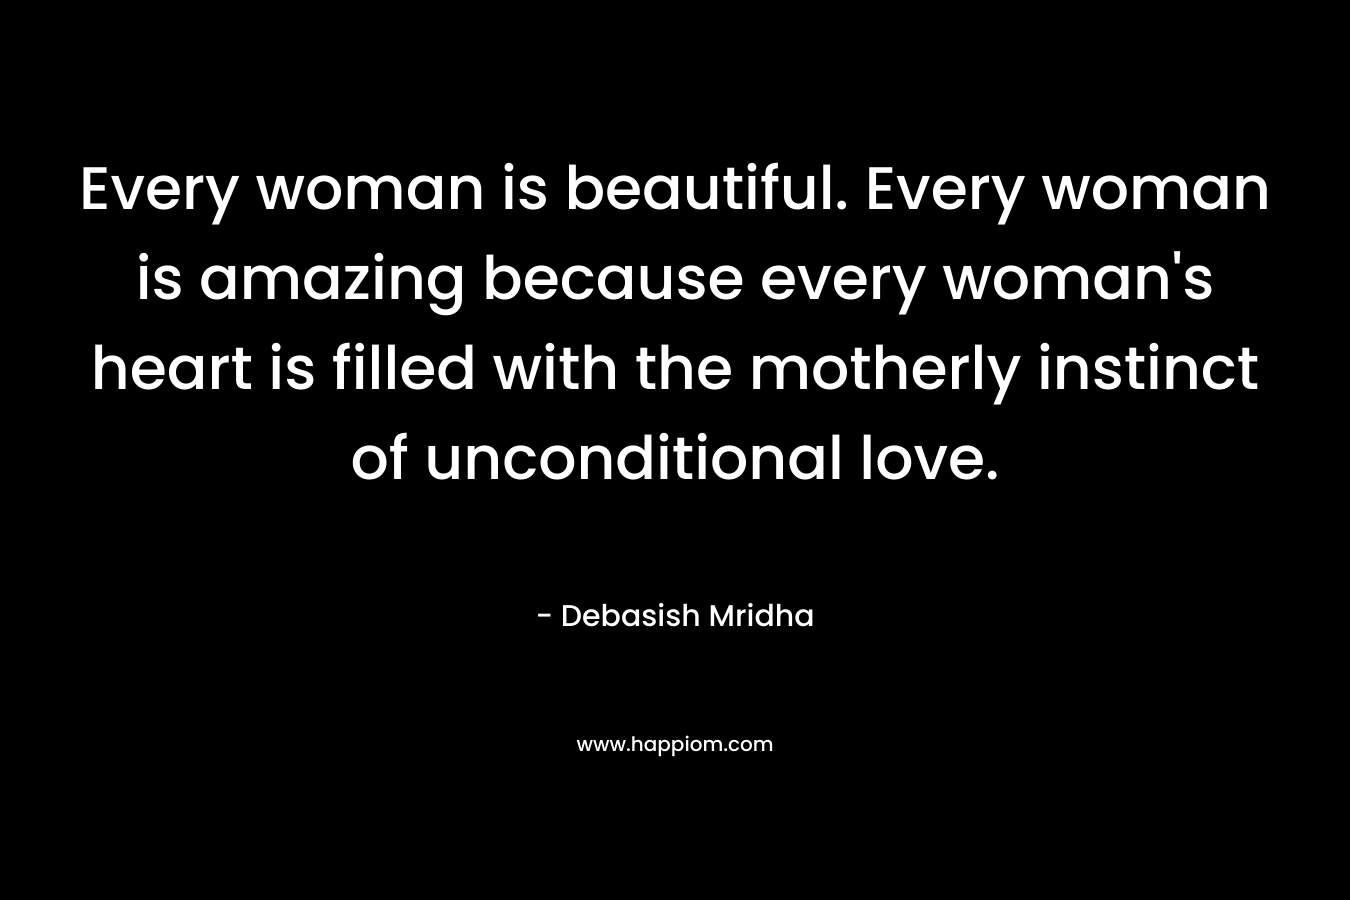 Every woman is beautiful. Every woman is amazing because every woman's heart is filled with the motherly instinct of unconditional love.